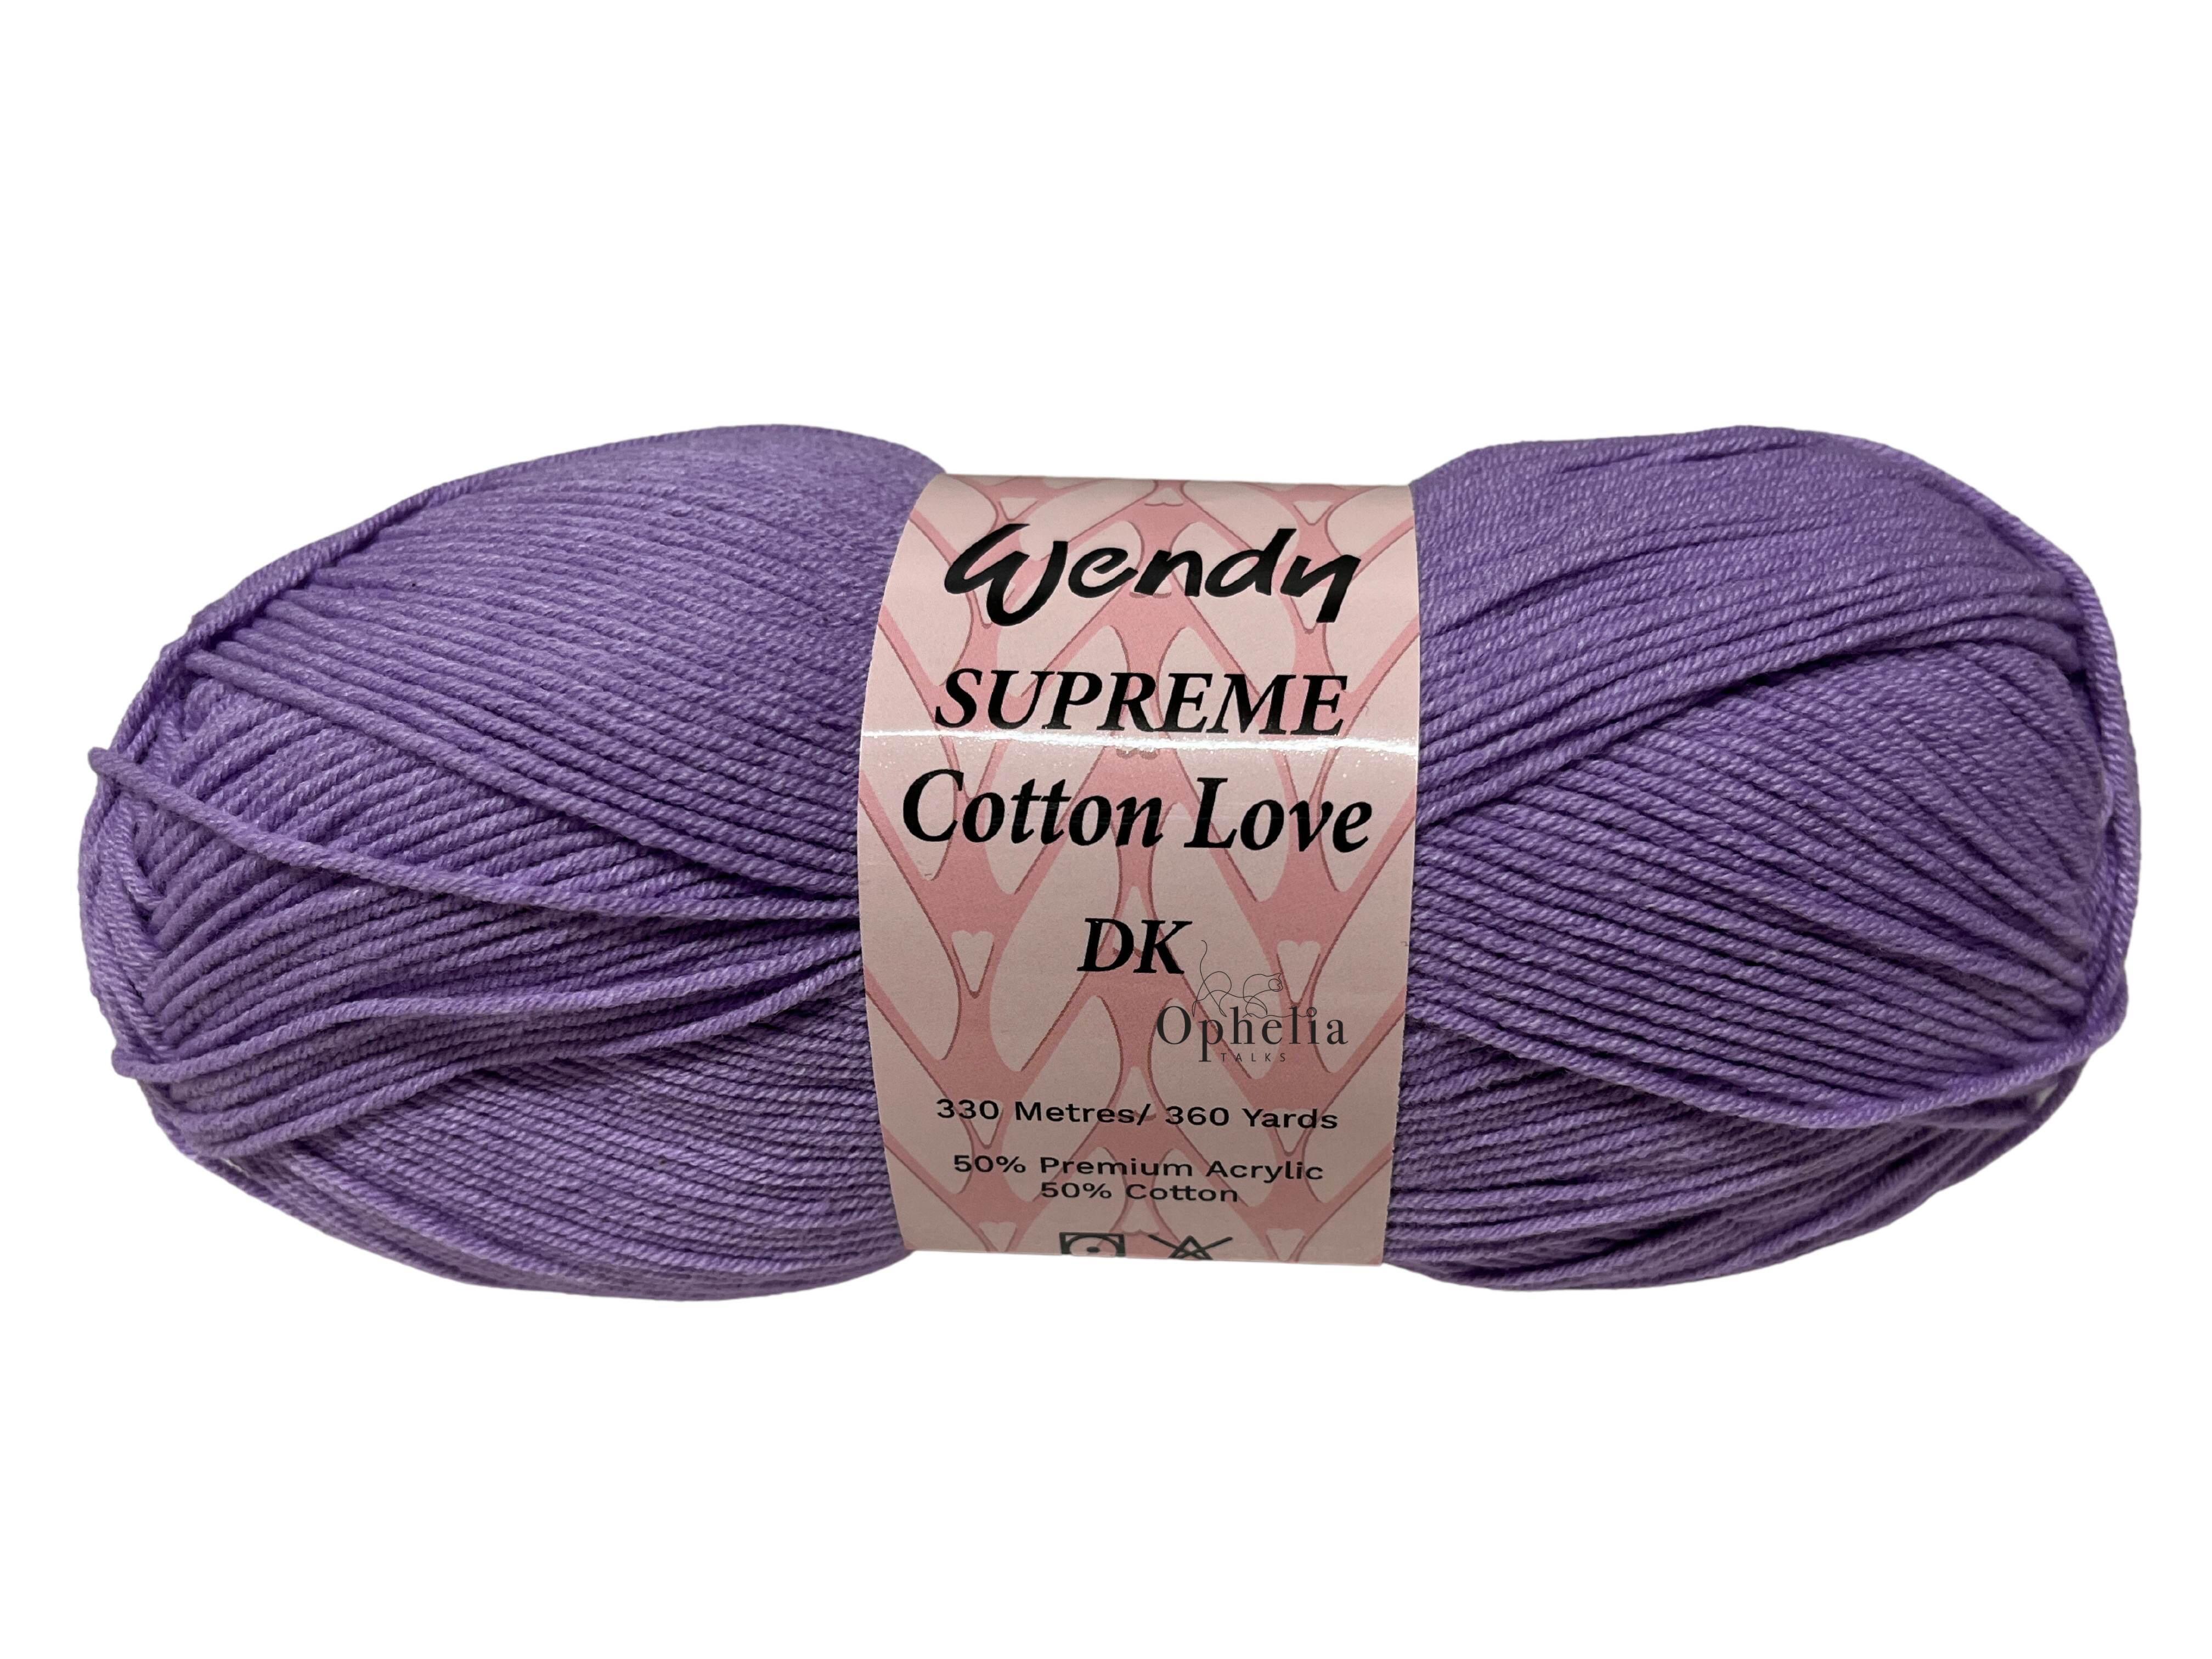 Wendy supreme cotton love in the colour lavender WCT09